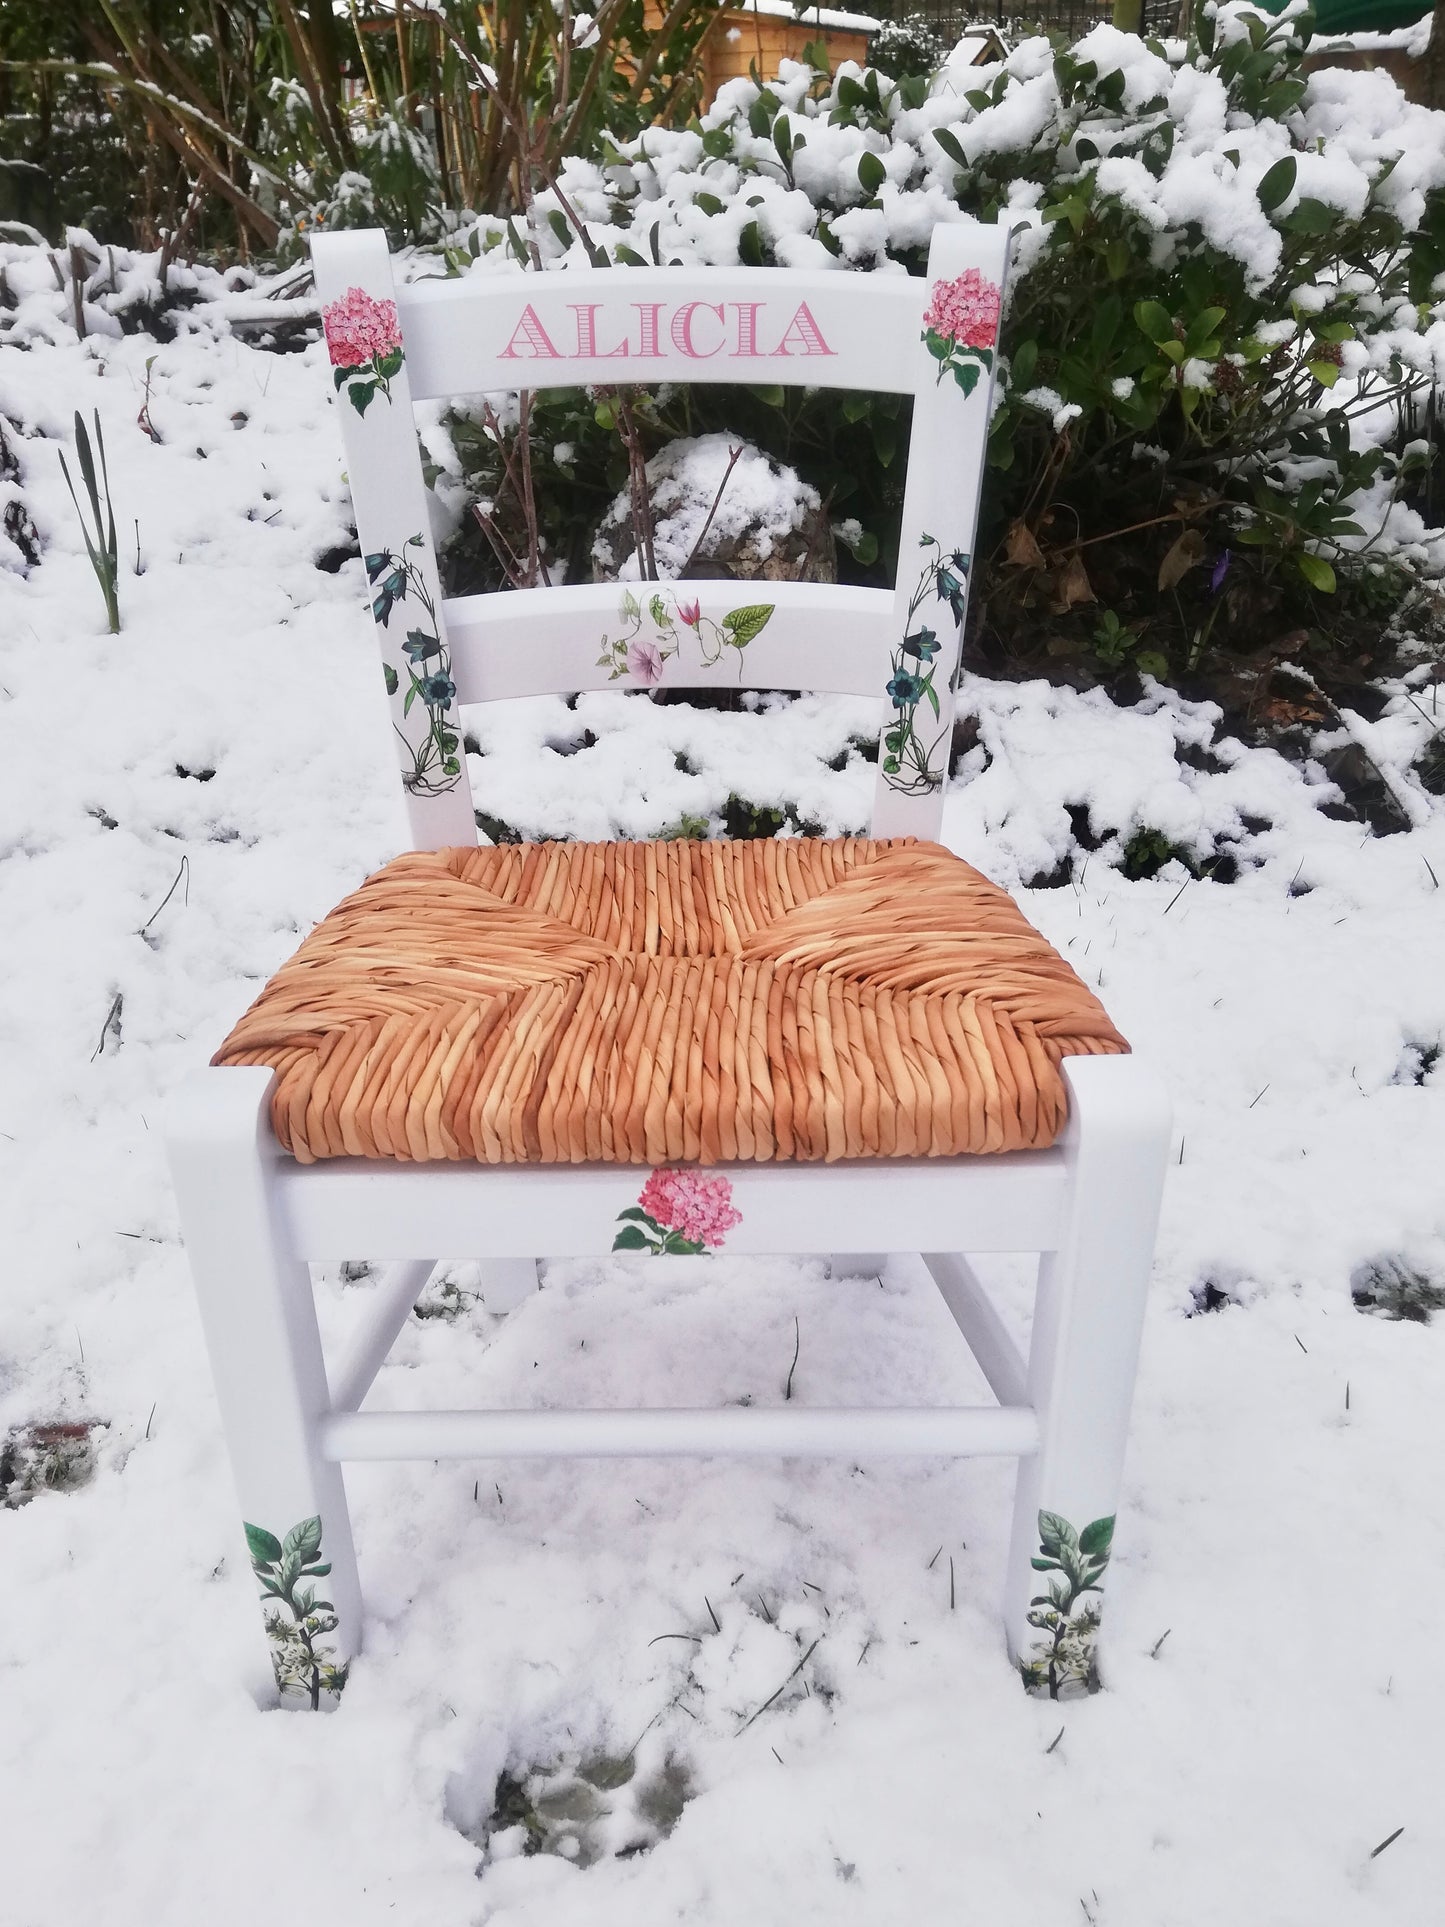 Rush seat personalised children's chair - Sweet Flowers theme - made to order